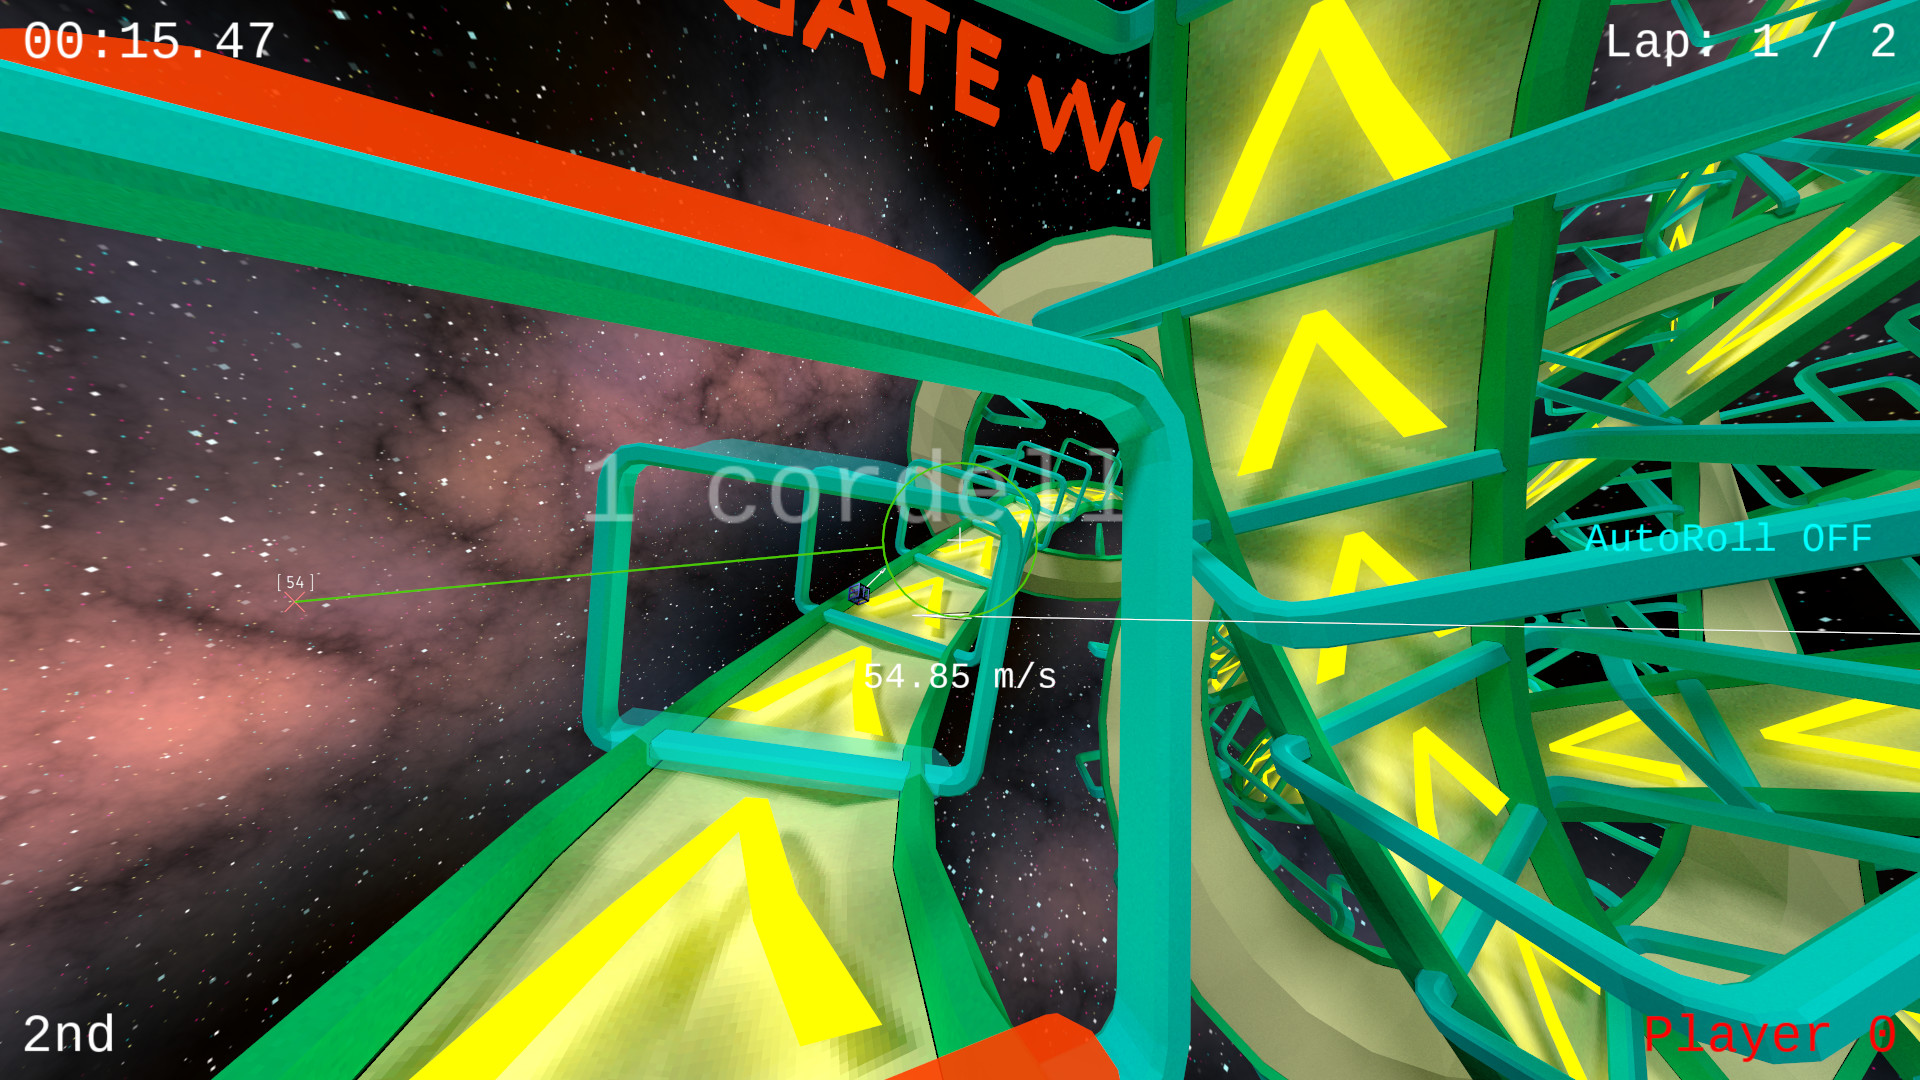 Space Cube Racers Free Download